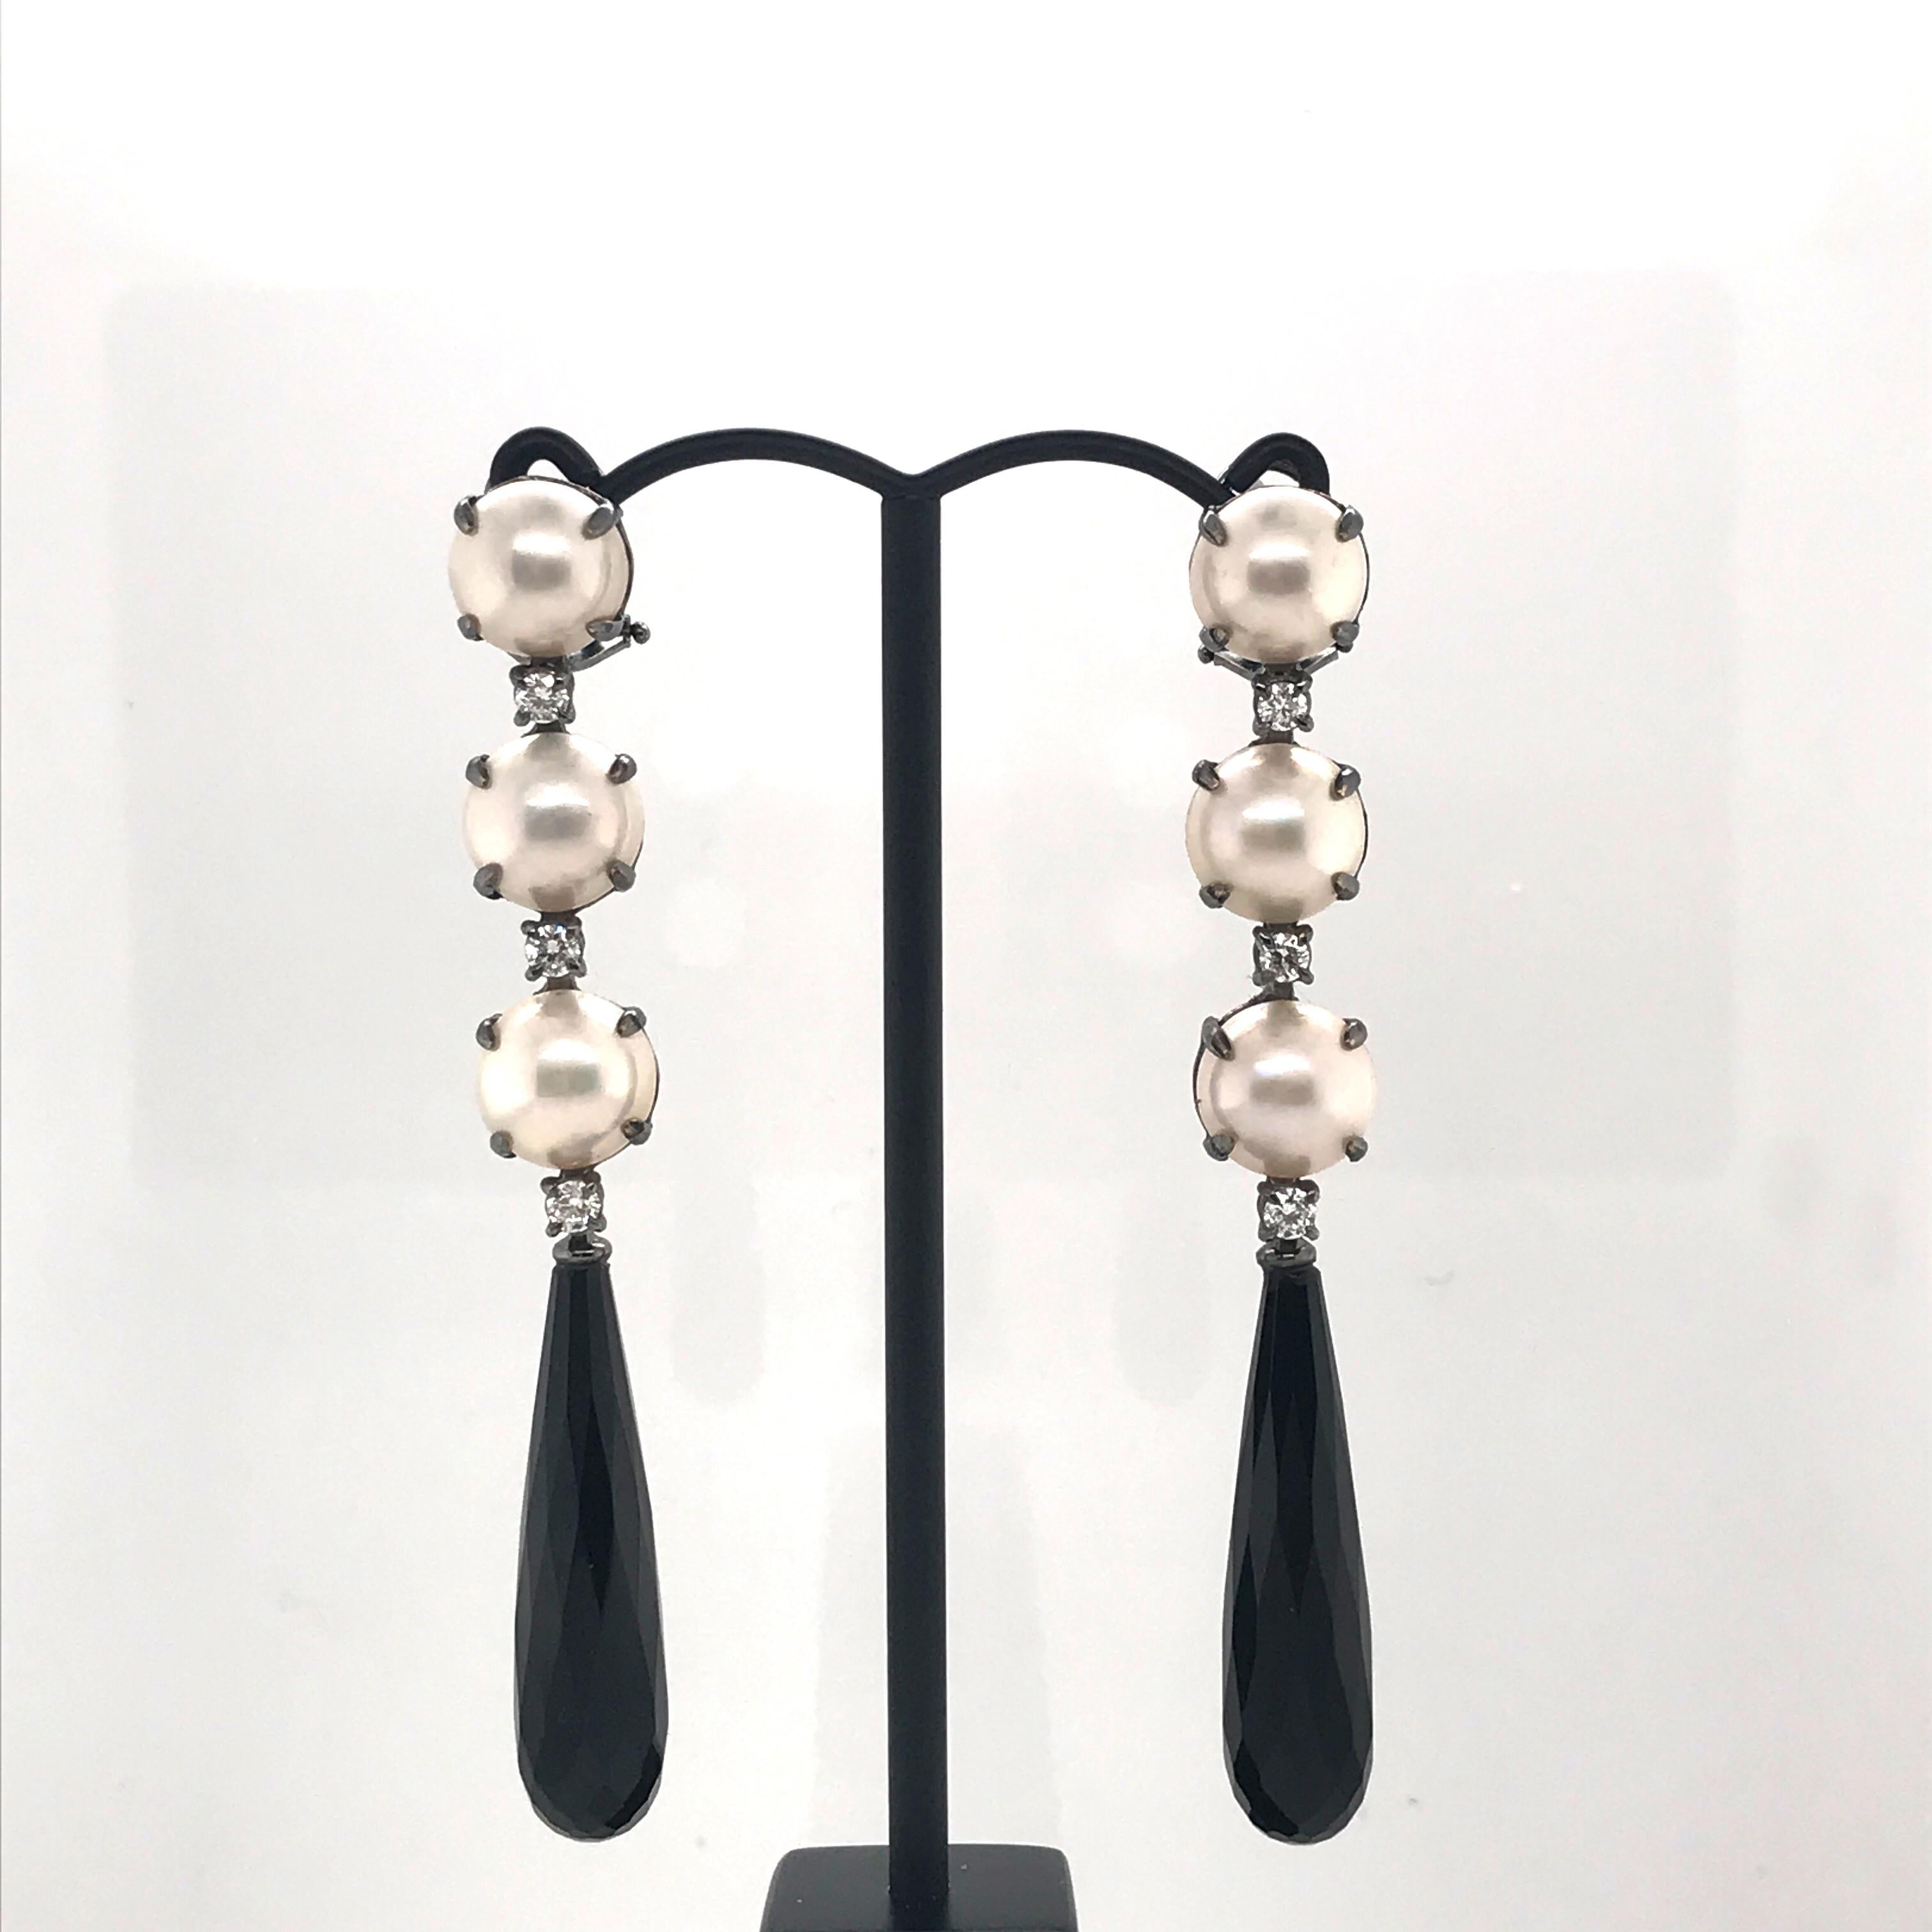 Mabe South Sea Pearls Pearl
6 Diamonds 0,420 Color G purity Vs
Natural Agathe 
Black Gold 5 grams
Chandelier Earrings
Can be adapted to ear not pierced